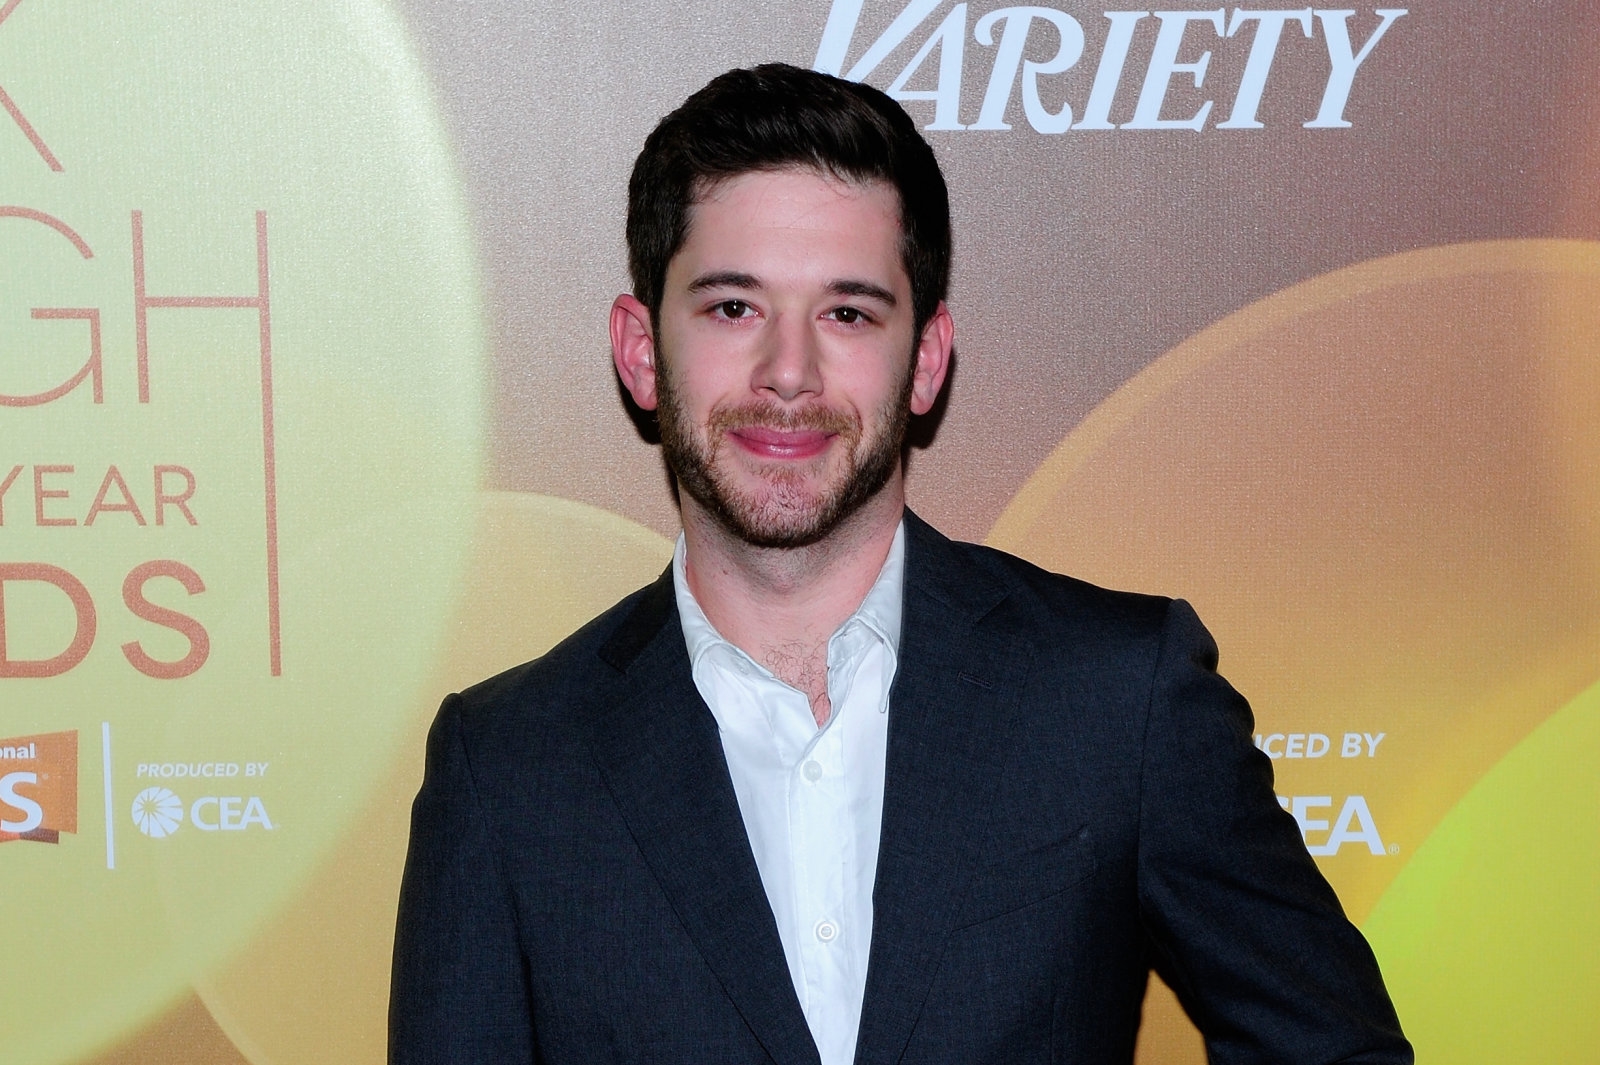 HQ Trivia and Vine co-founder Colin Kroll dies of apparent overdose | DeviceDaily.com